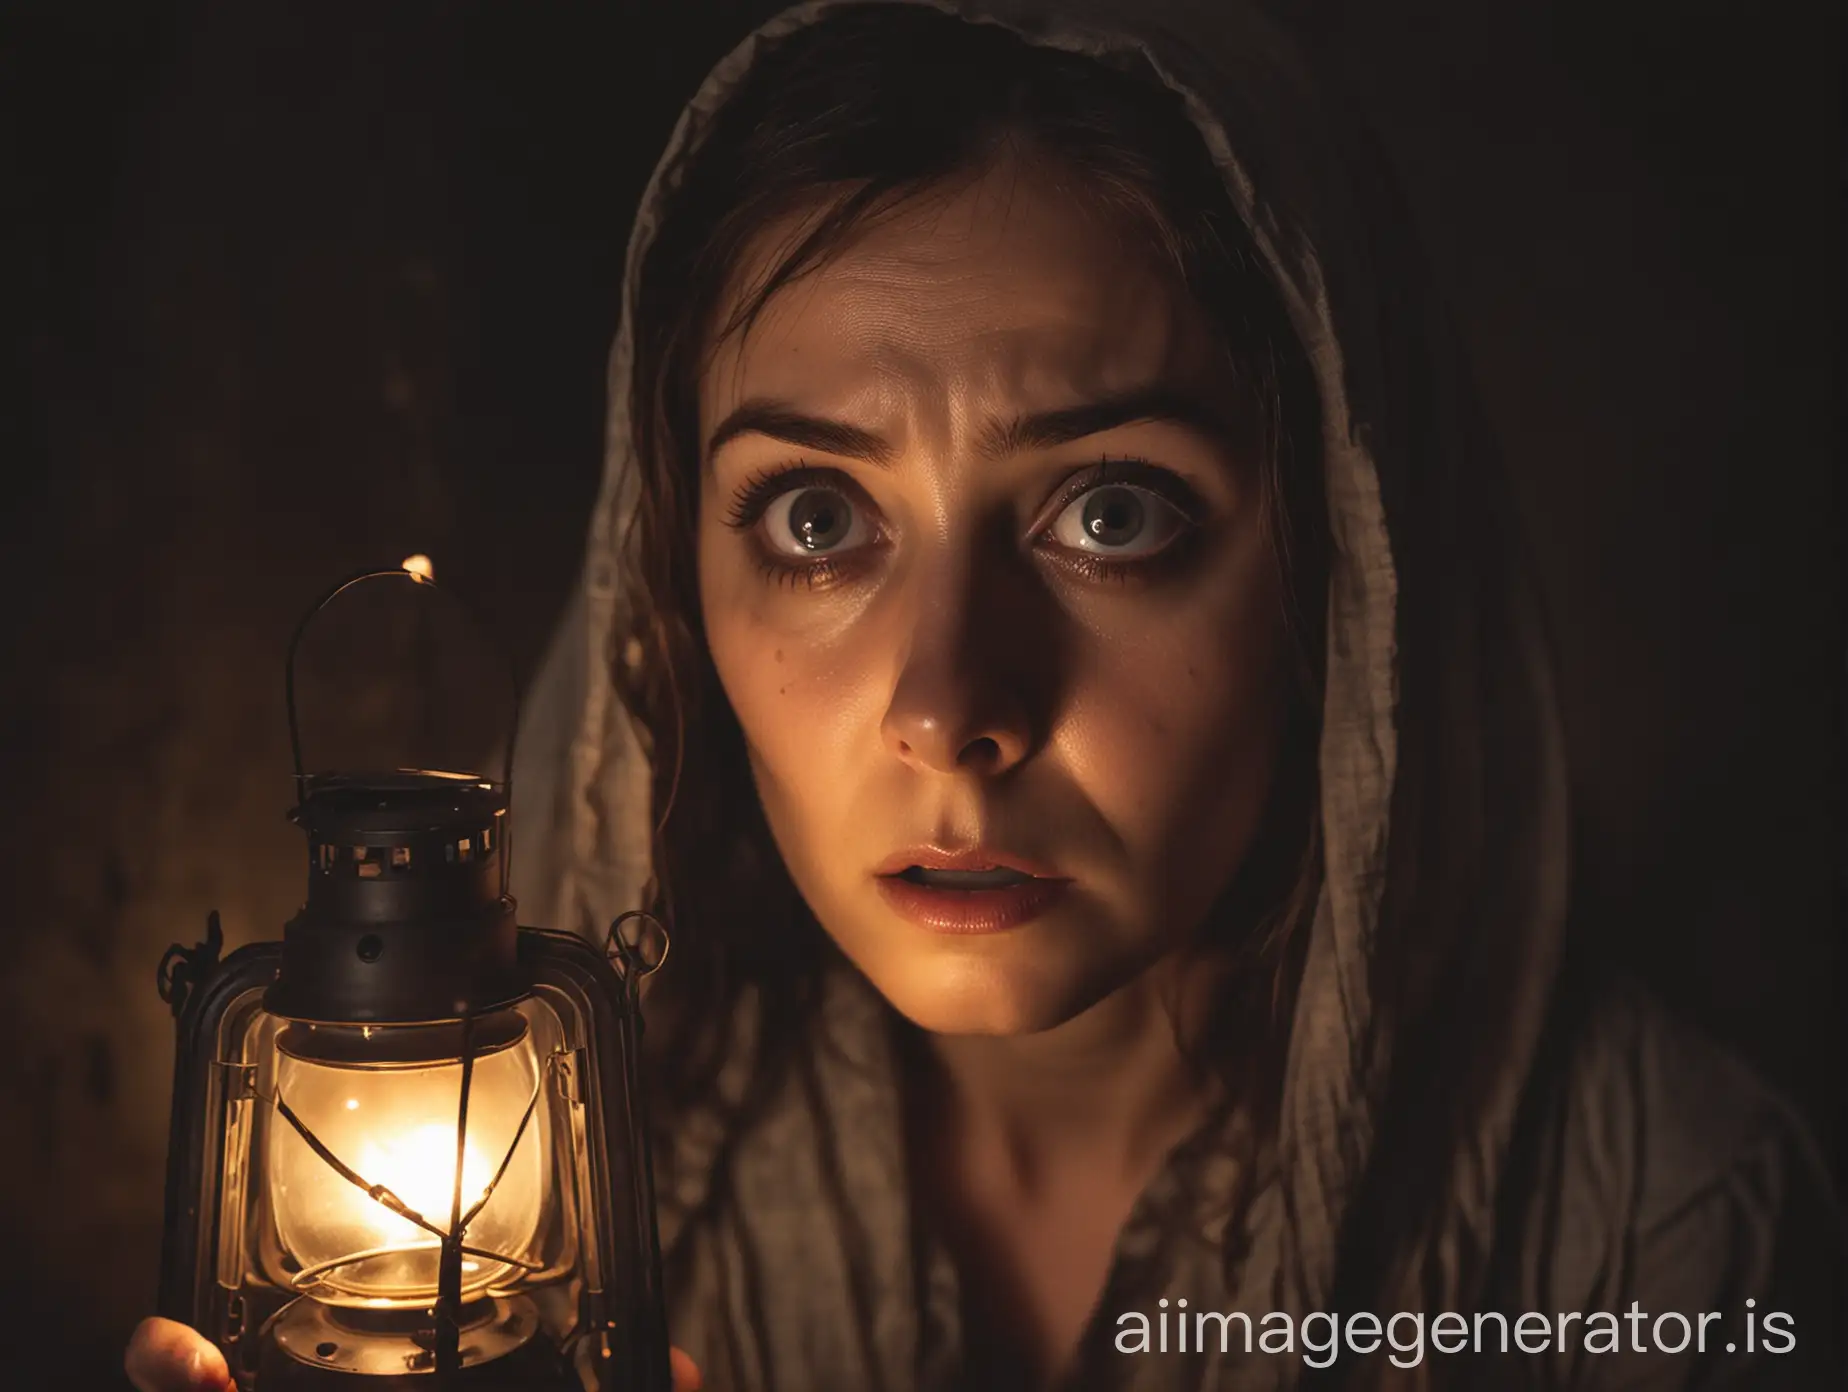 A scared-looking woman with wide eyes, holding a flickering lantern.